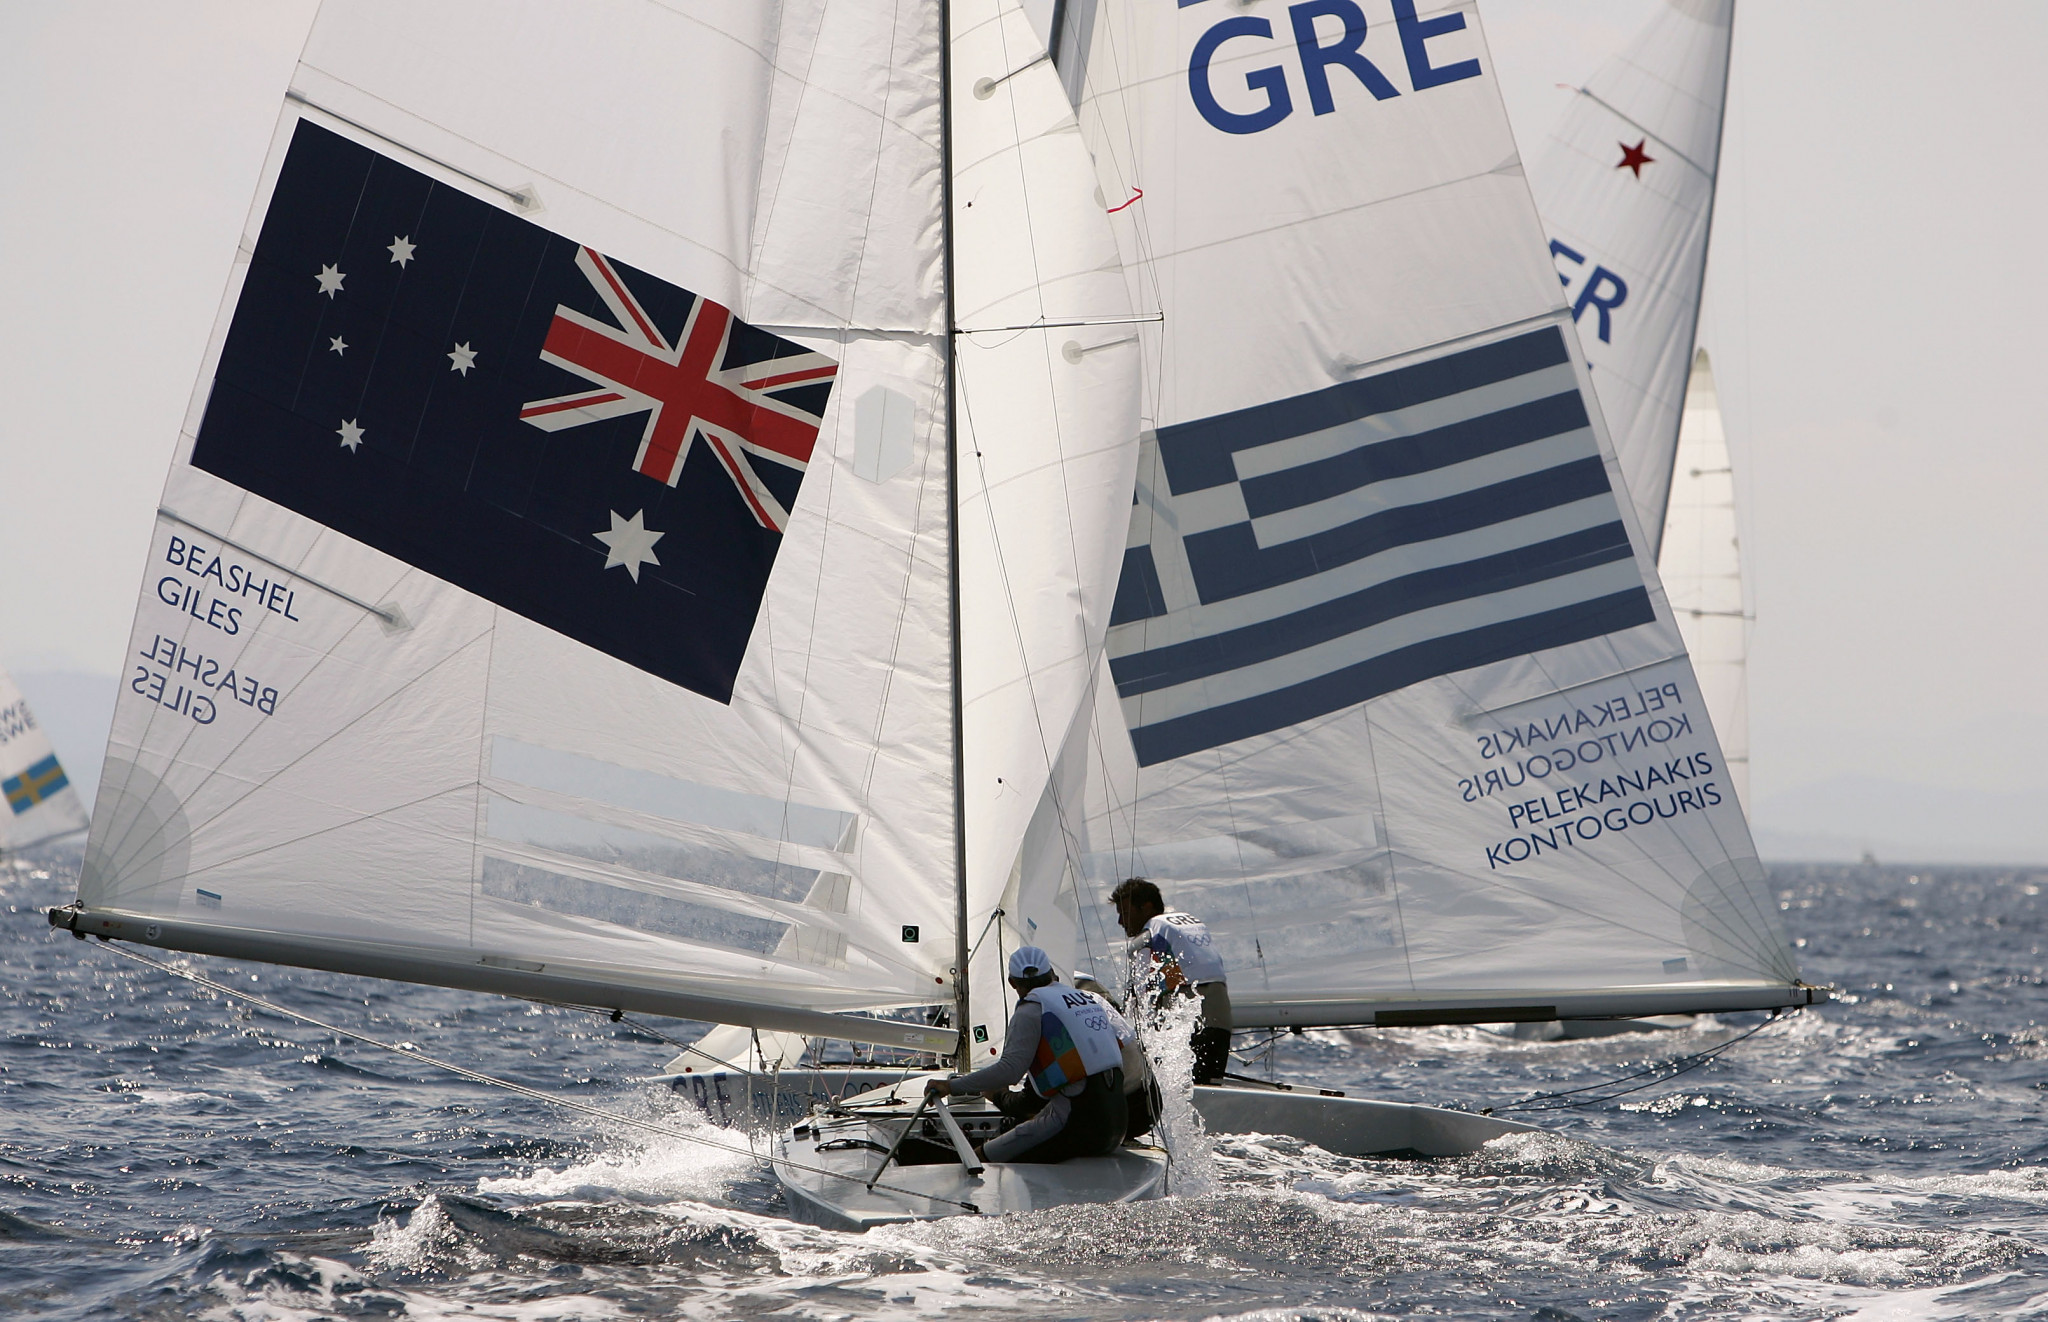 Leonidas Pelekanakis competed alongside George Kontogouris in the two-person keelboat at the Athens 2004 Olympic Games ©Getty Images